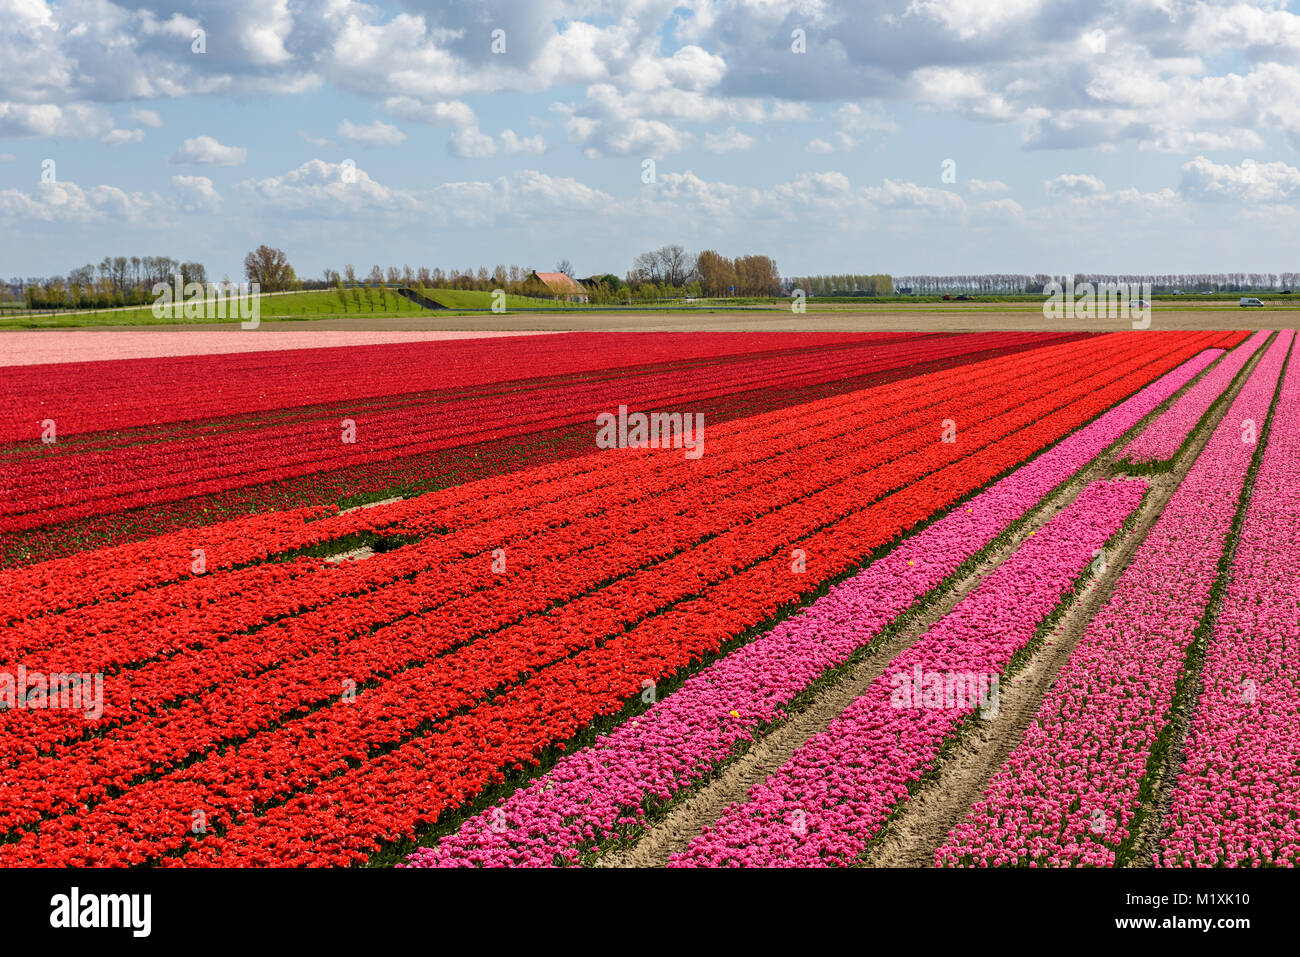 Tulip fields in Holland on a sunny day in spring. The beautiful rows with flowers are in full bloom with red and pink tulips.  The sky above is blue w Stock Photo